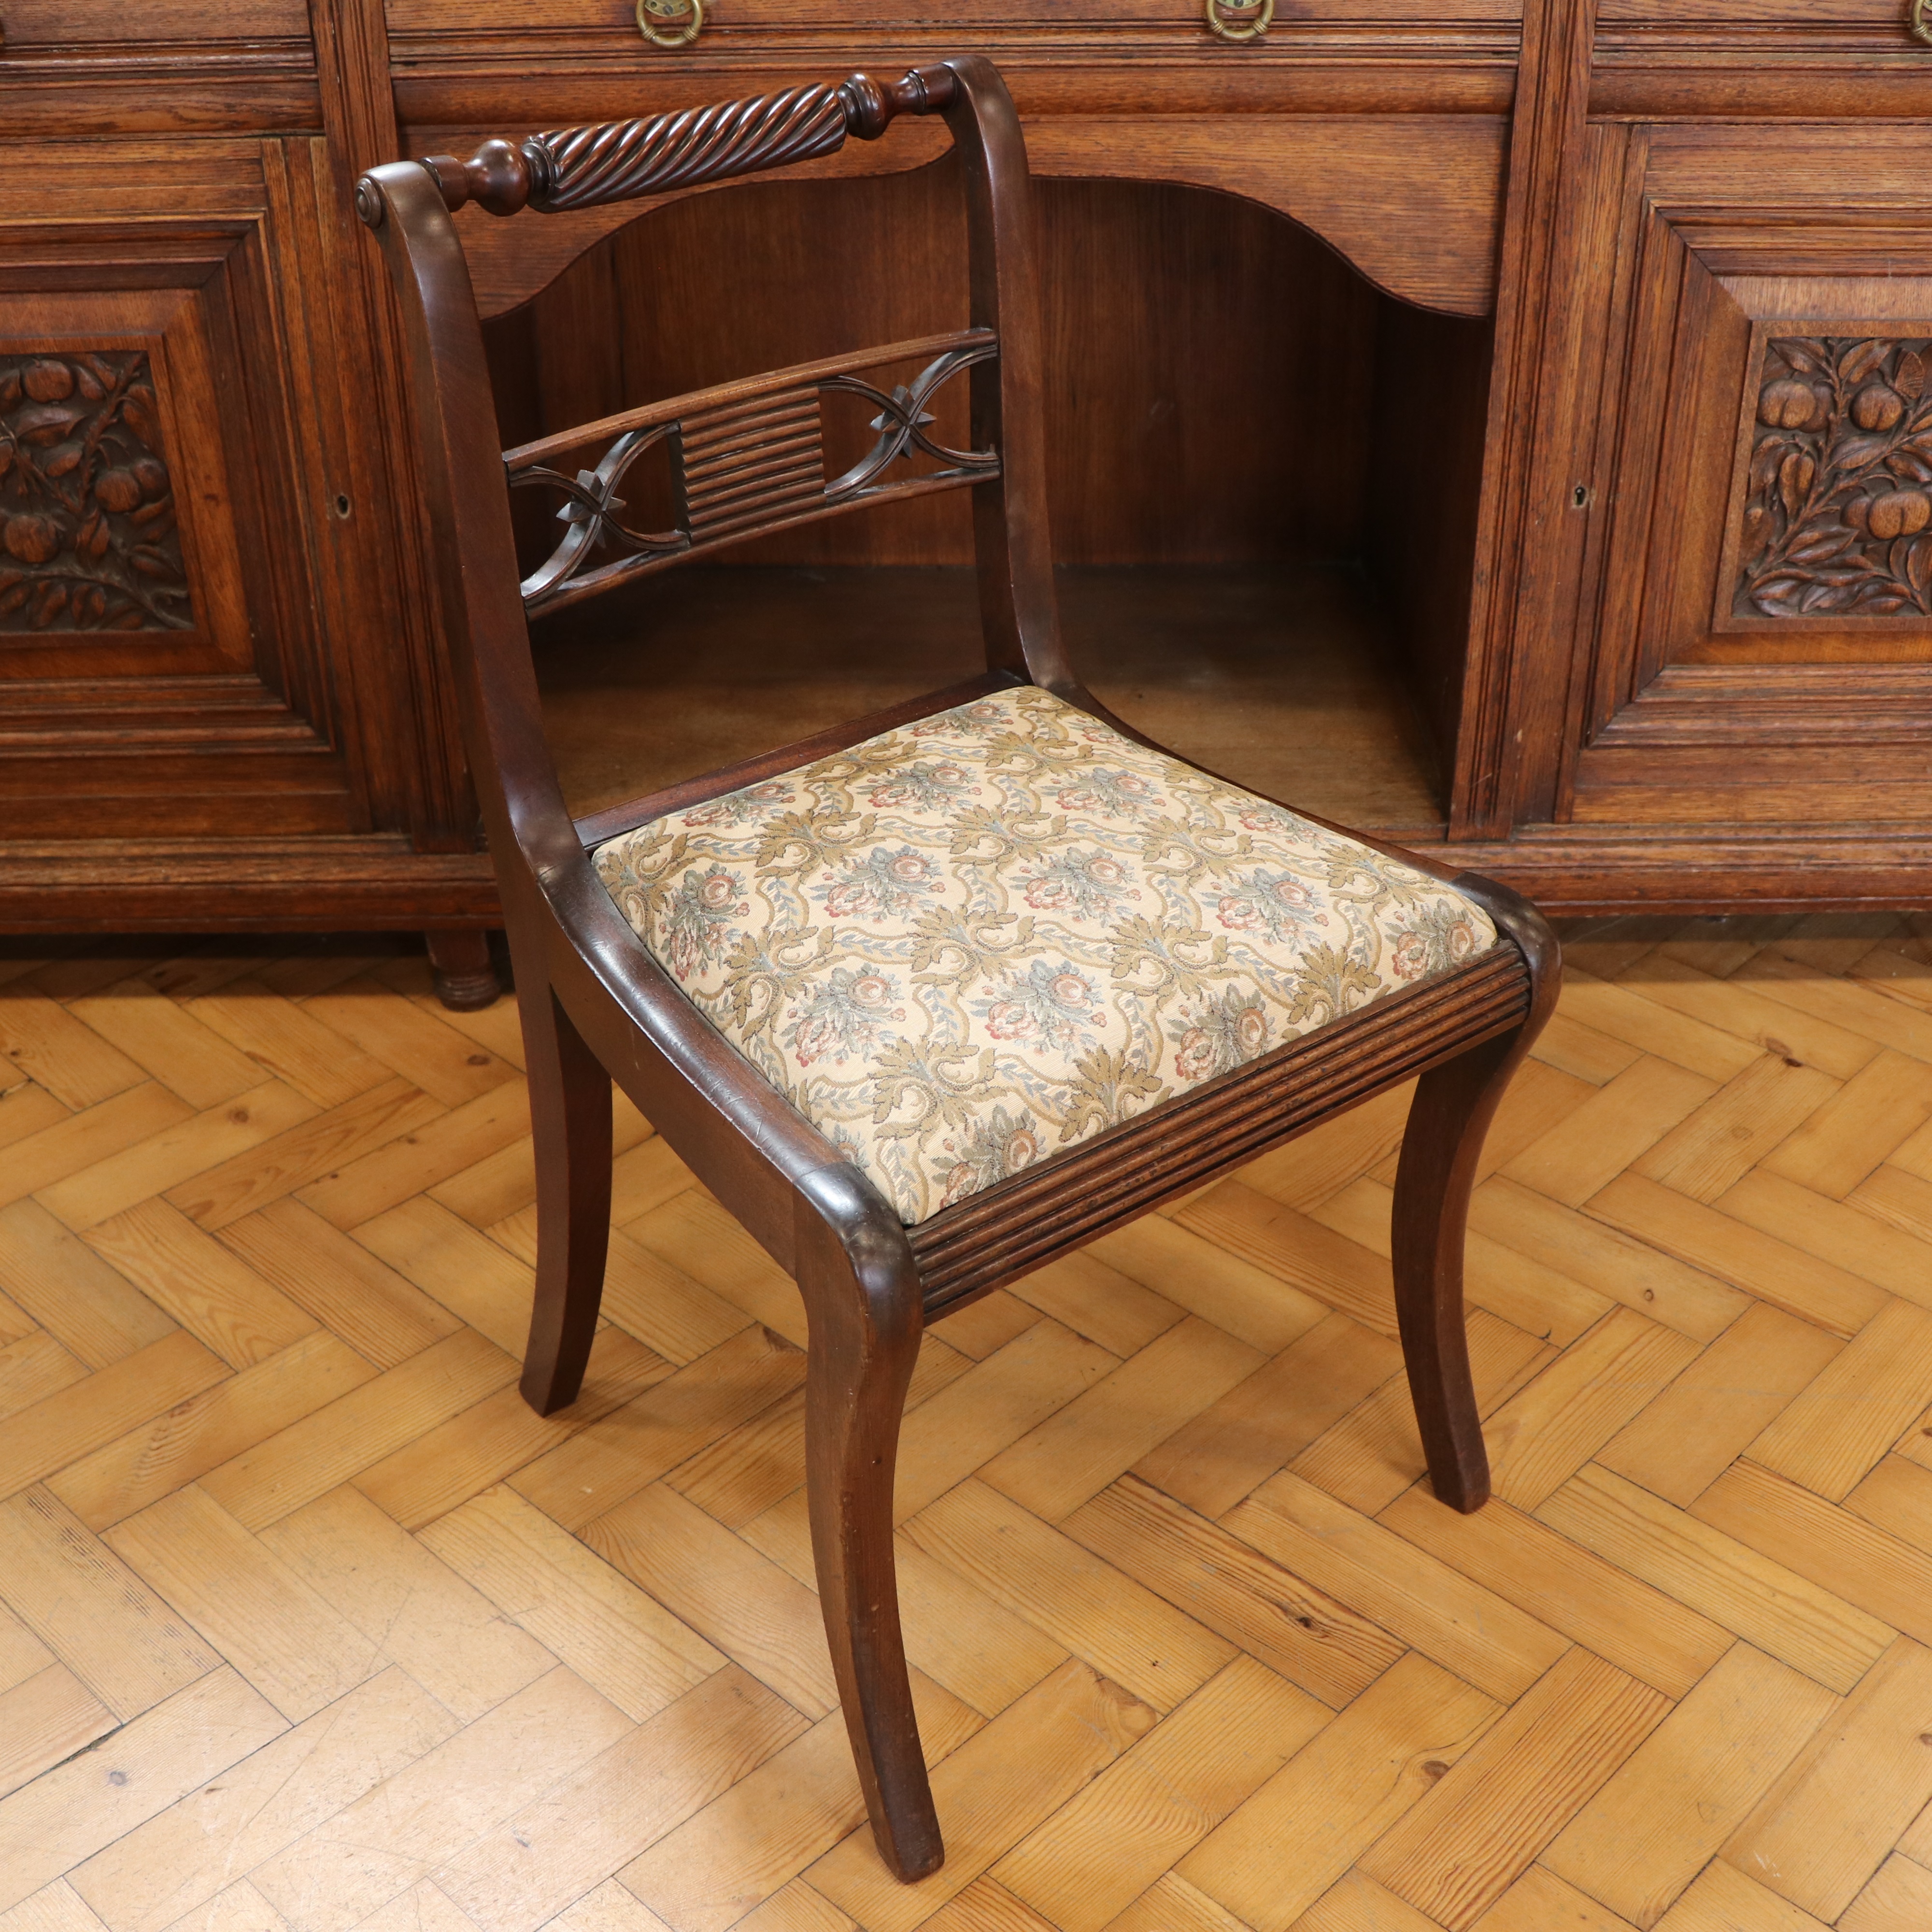 A set of four George III mahogany dining chairs having cable backs and sabre legs - Image 2 of 4